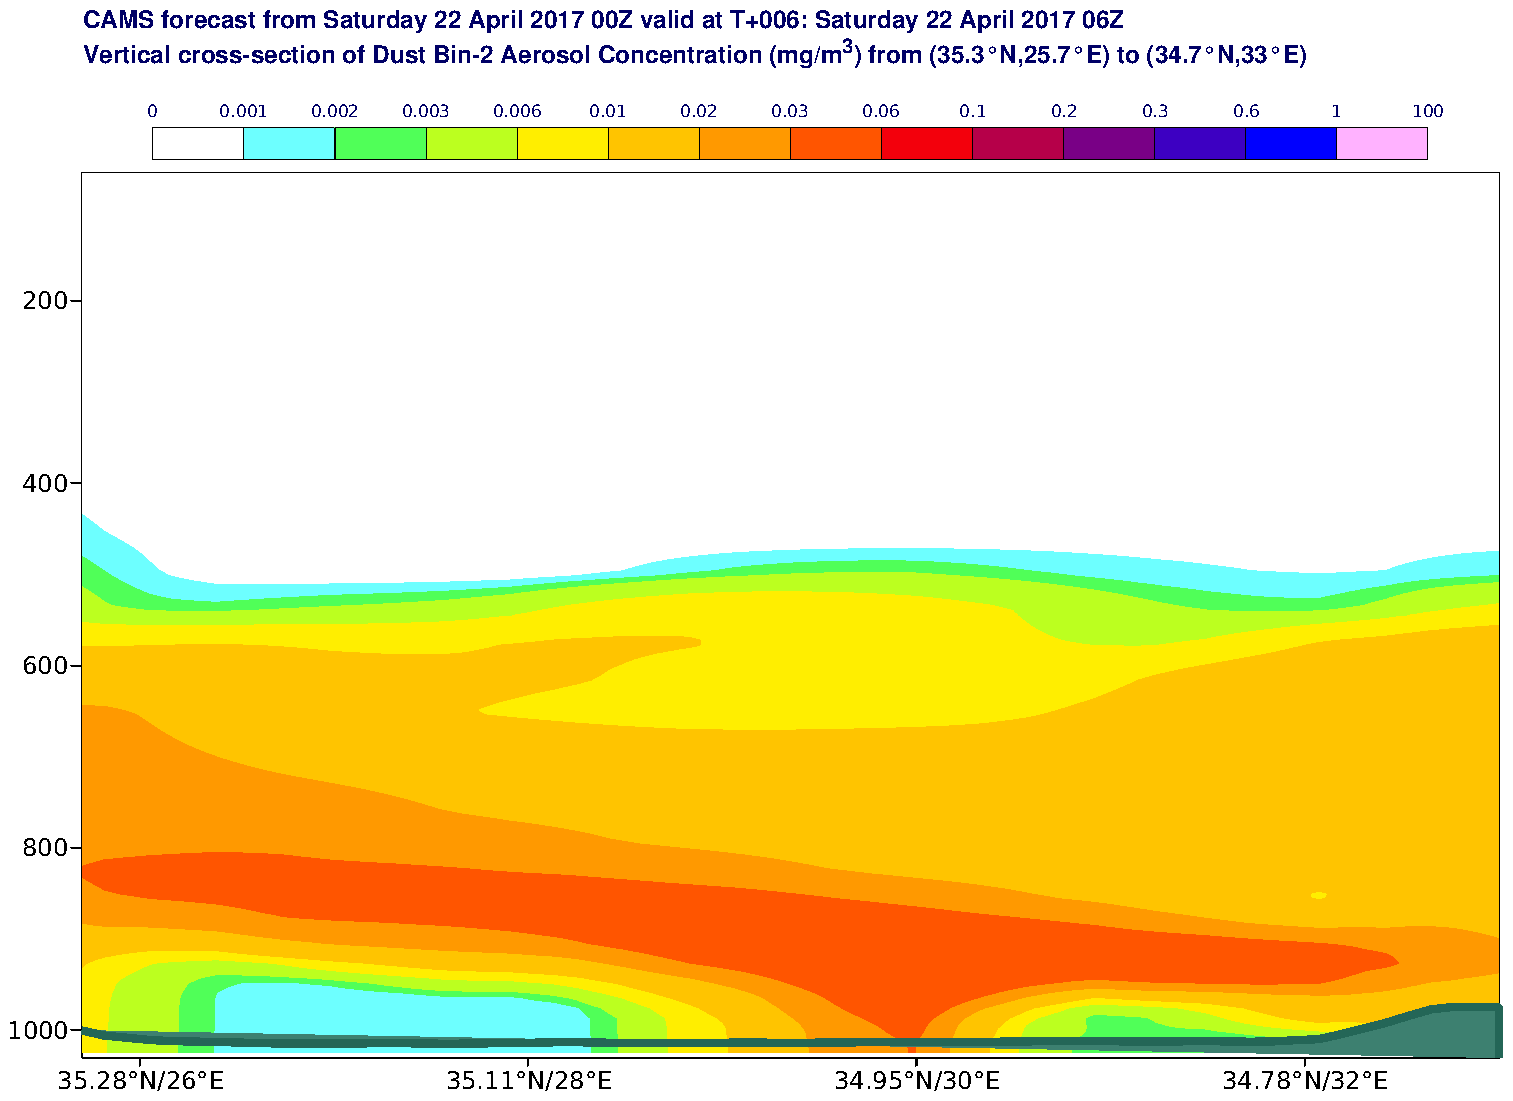 Vertical cross-section of Dust Bin-2 Aerosol Concentration (mg/m3) valid at T6 - 2017-04-22 06:00